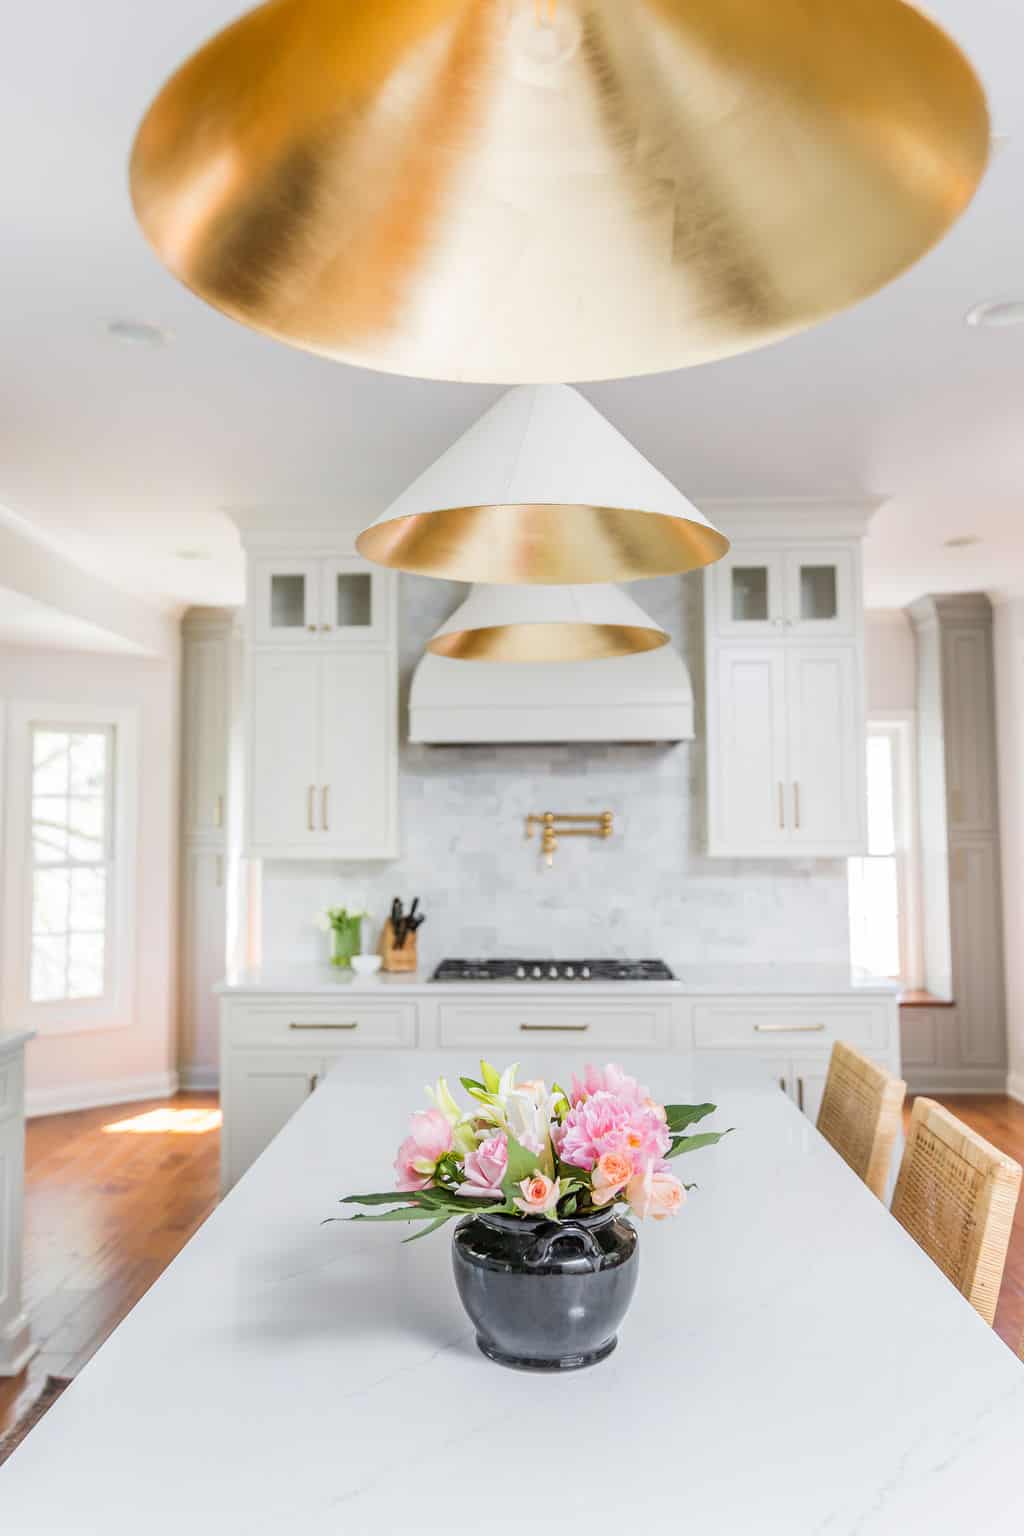 Nicholas Design Build | A remodeled kitchen with a white color scheme and a striking gold pendant hanging over the central island.